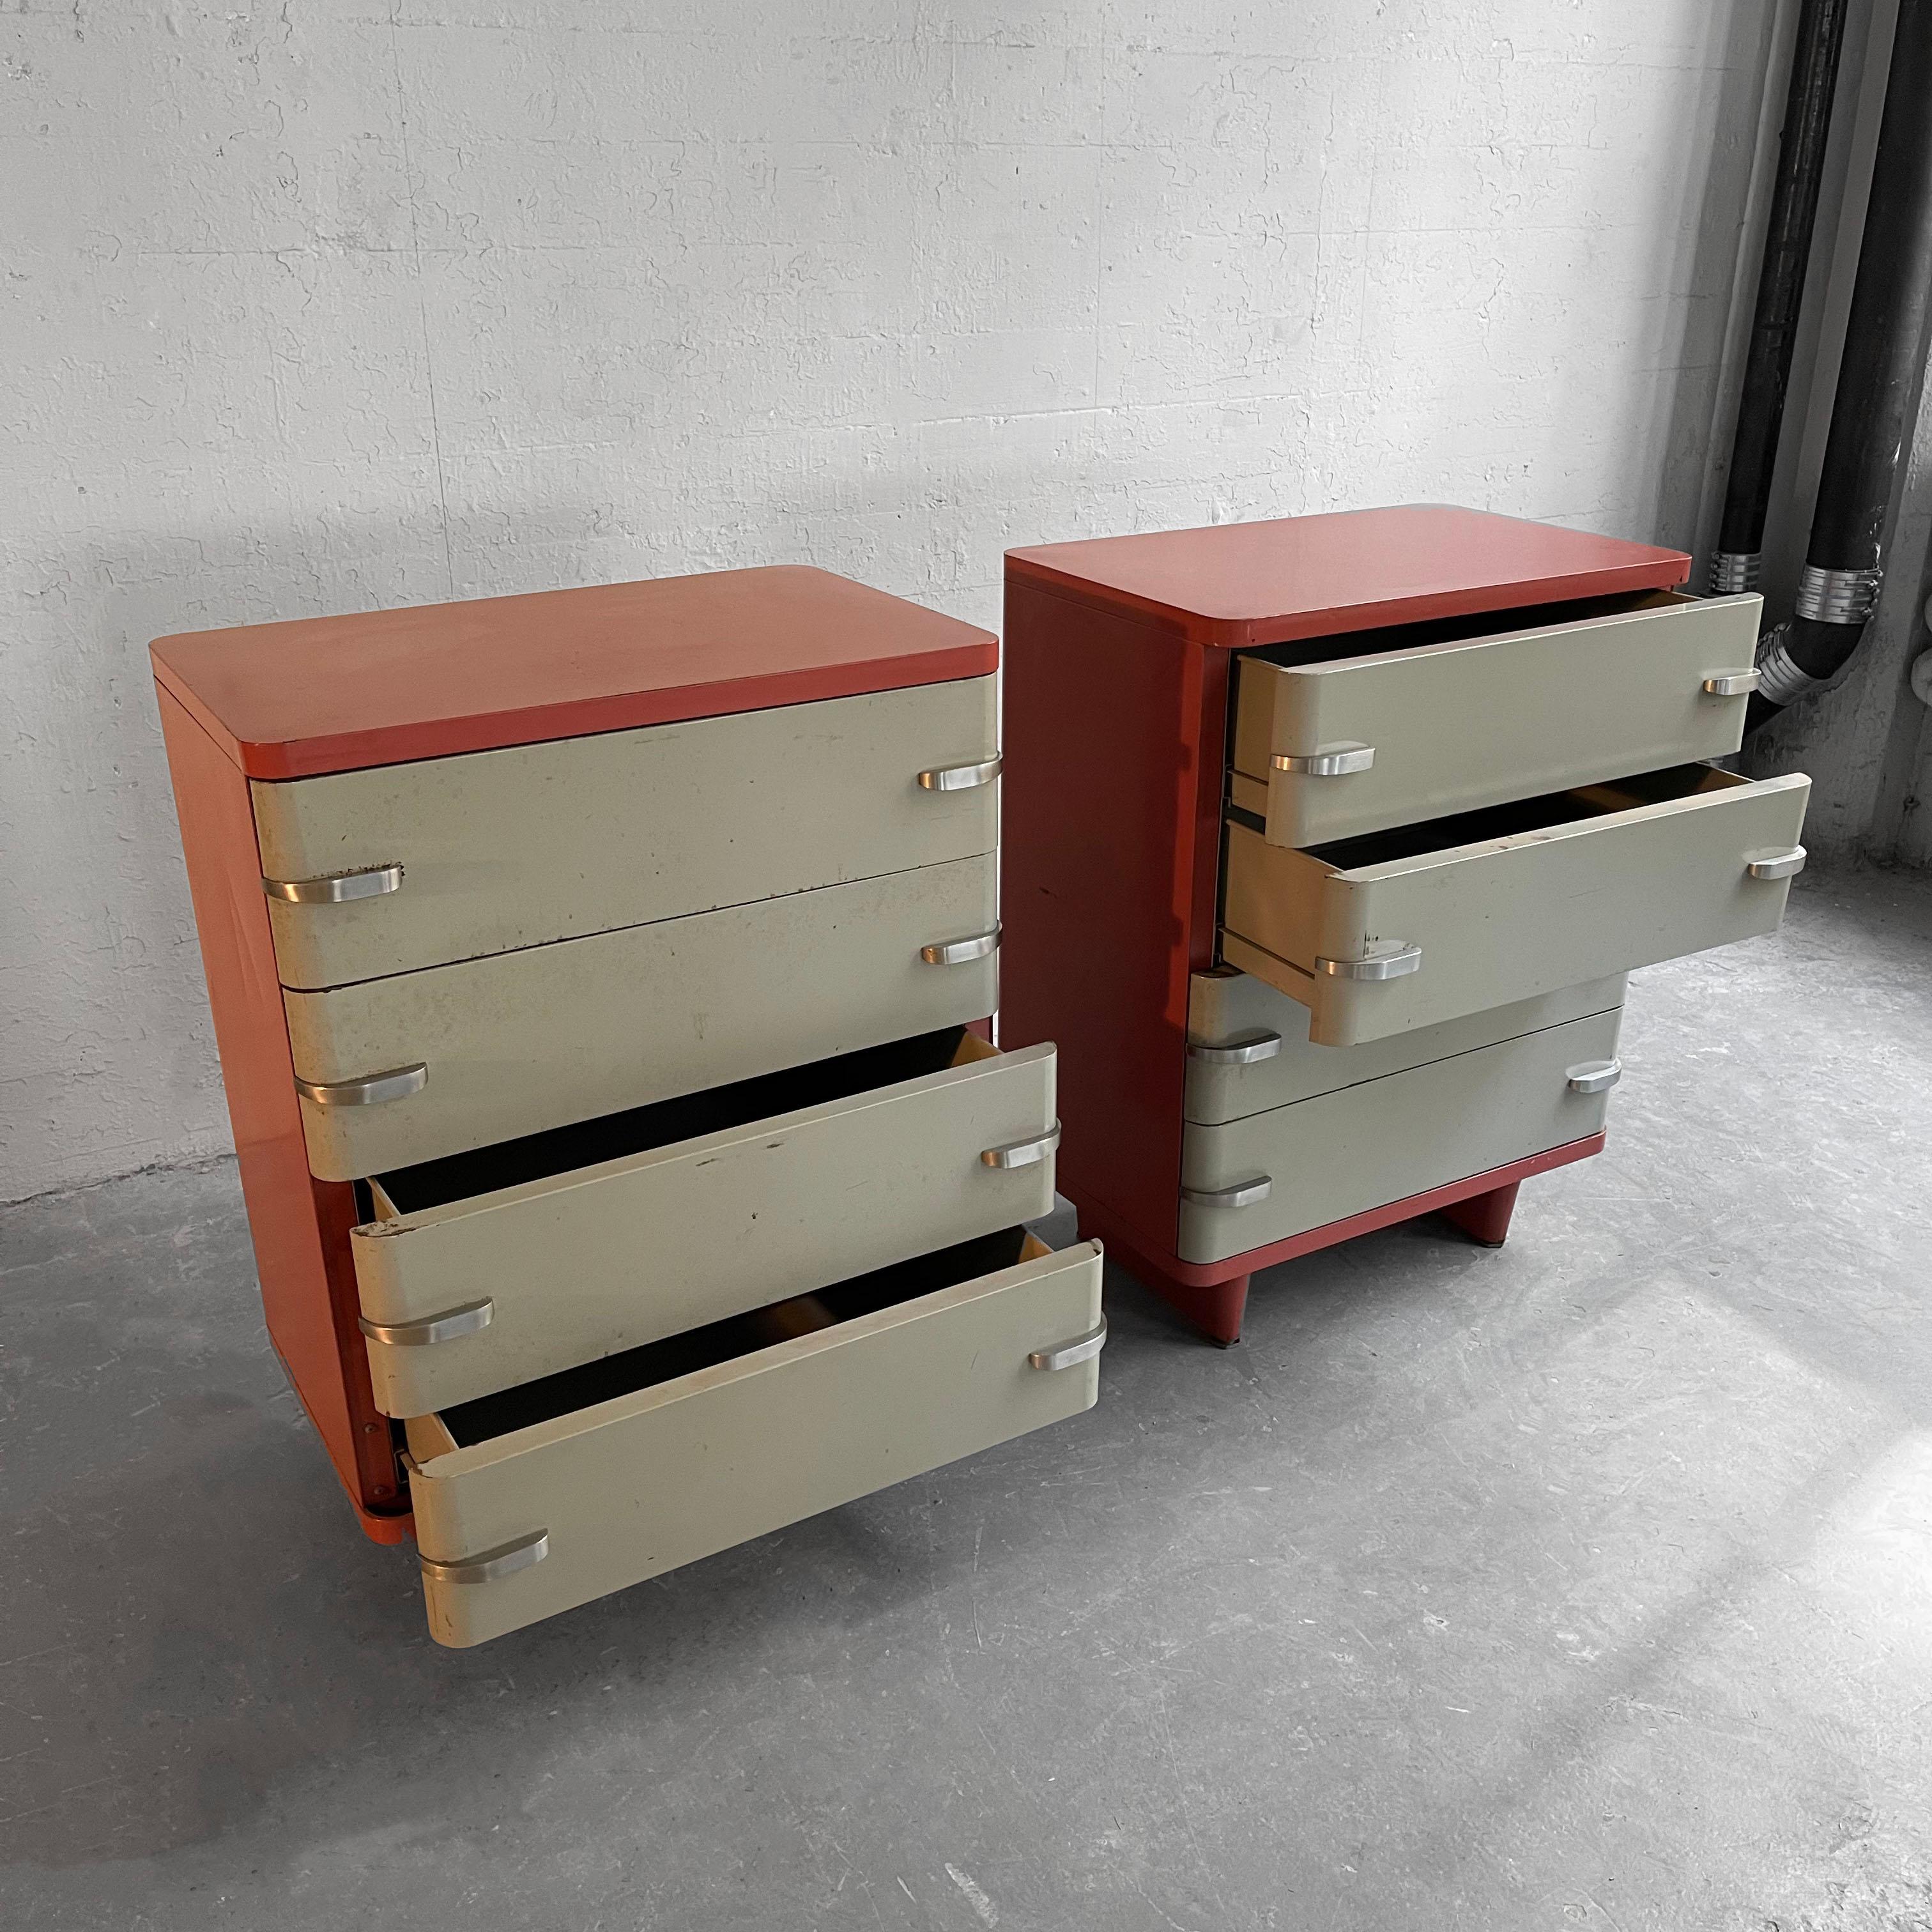 Machine-Age Painted Steel Highboy Dressers by Norman Bel Geddes For Sale 4